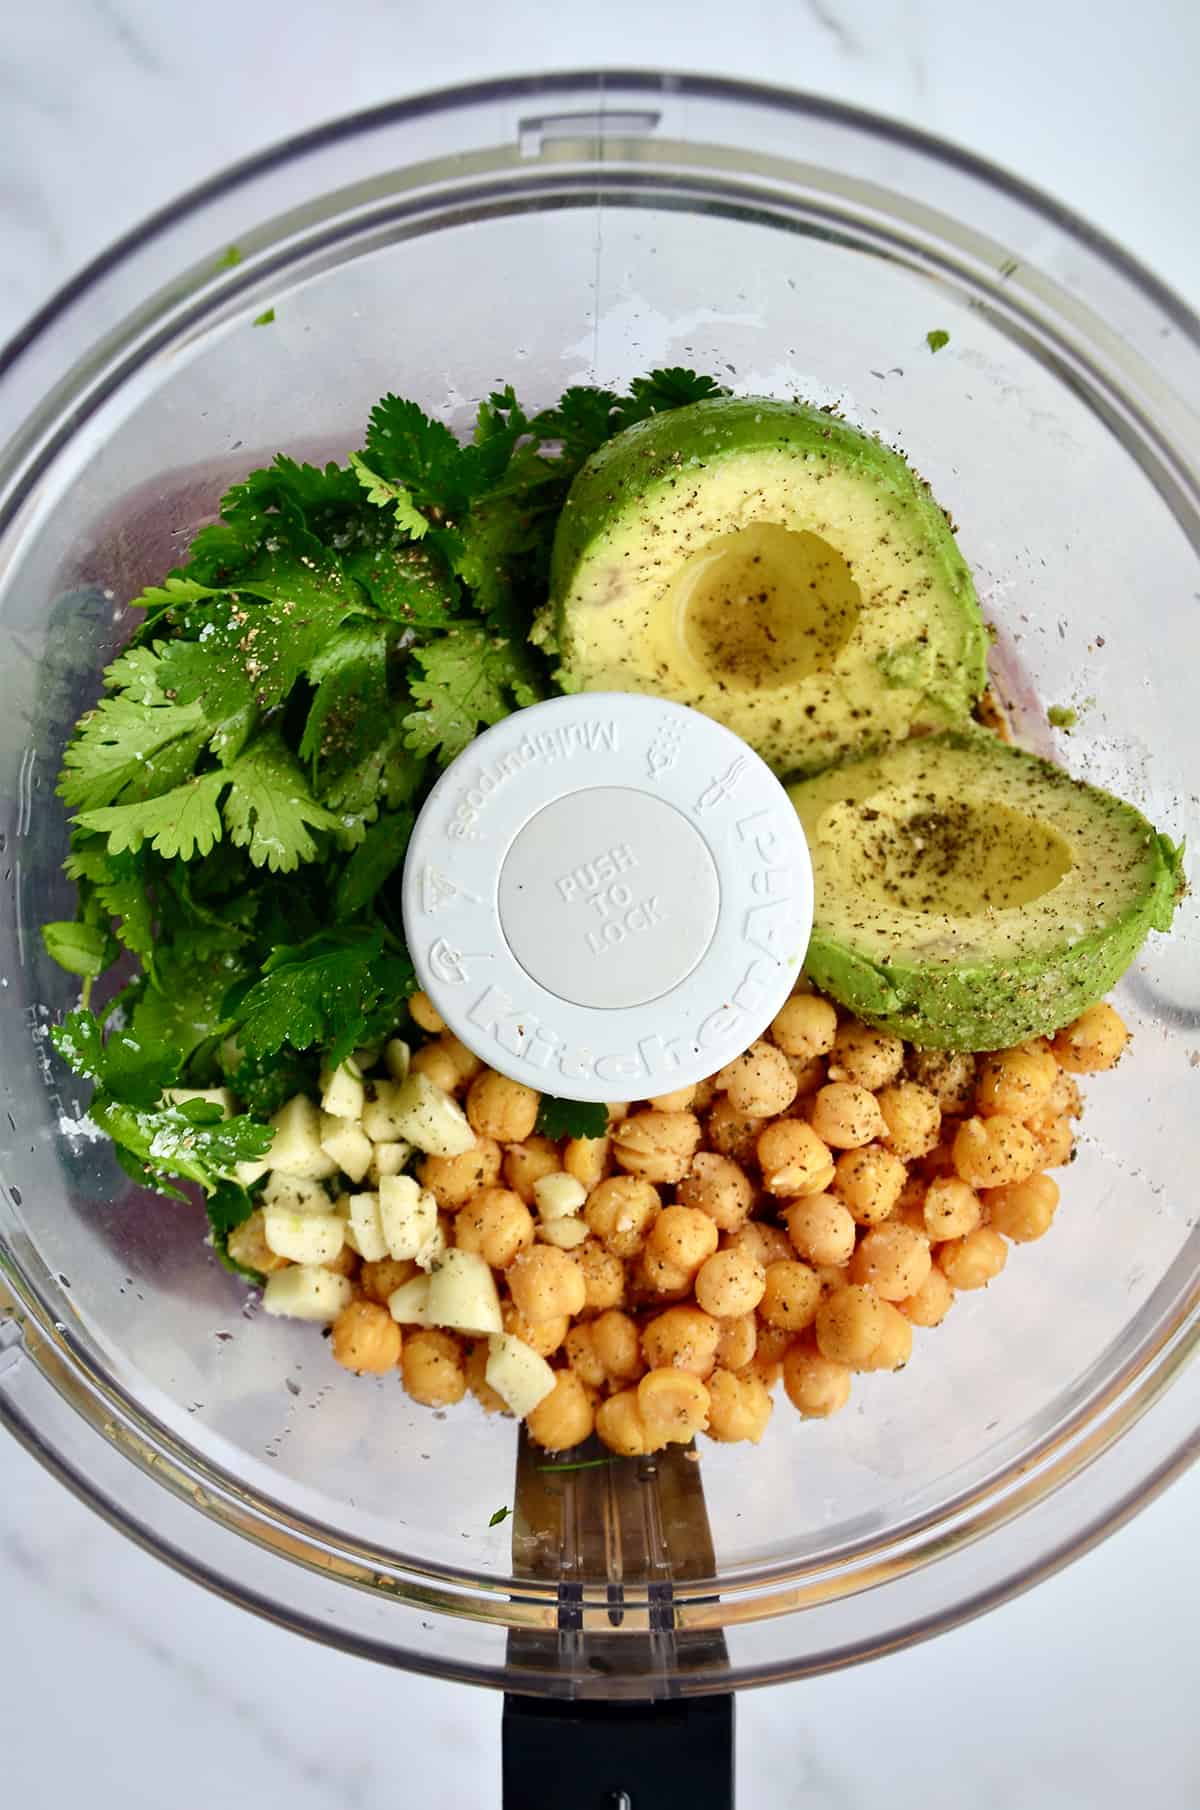 Chickpeas, chopped garlic, avocado halves, fresh herbs, salt and pepper in the bowl of a food processor.